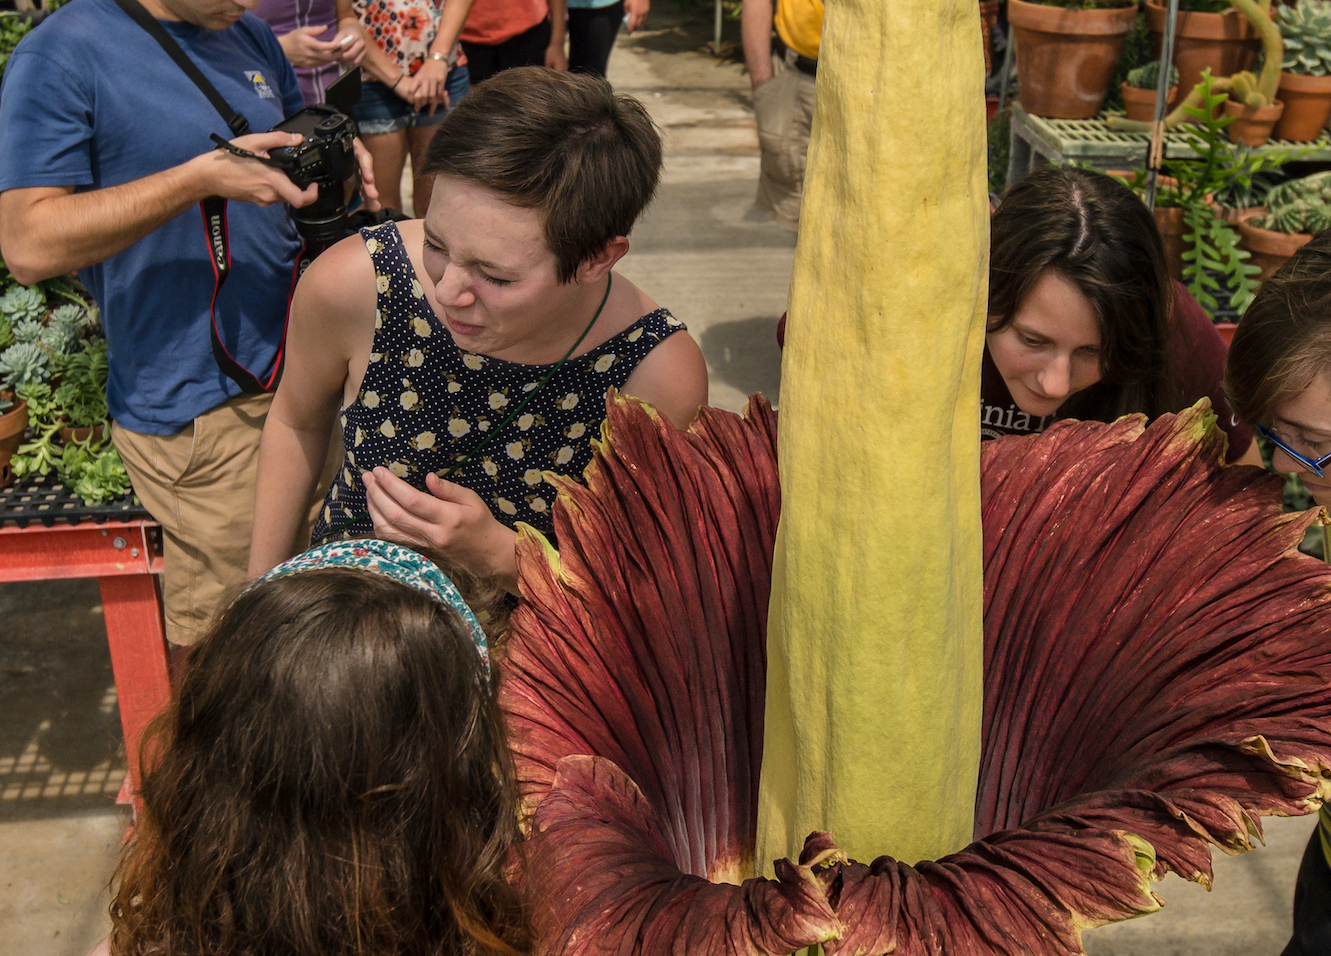 VT students lean in to smell the corpse flower on Saturday, August 29, 2015.